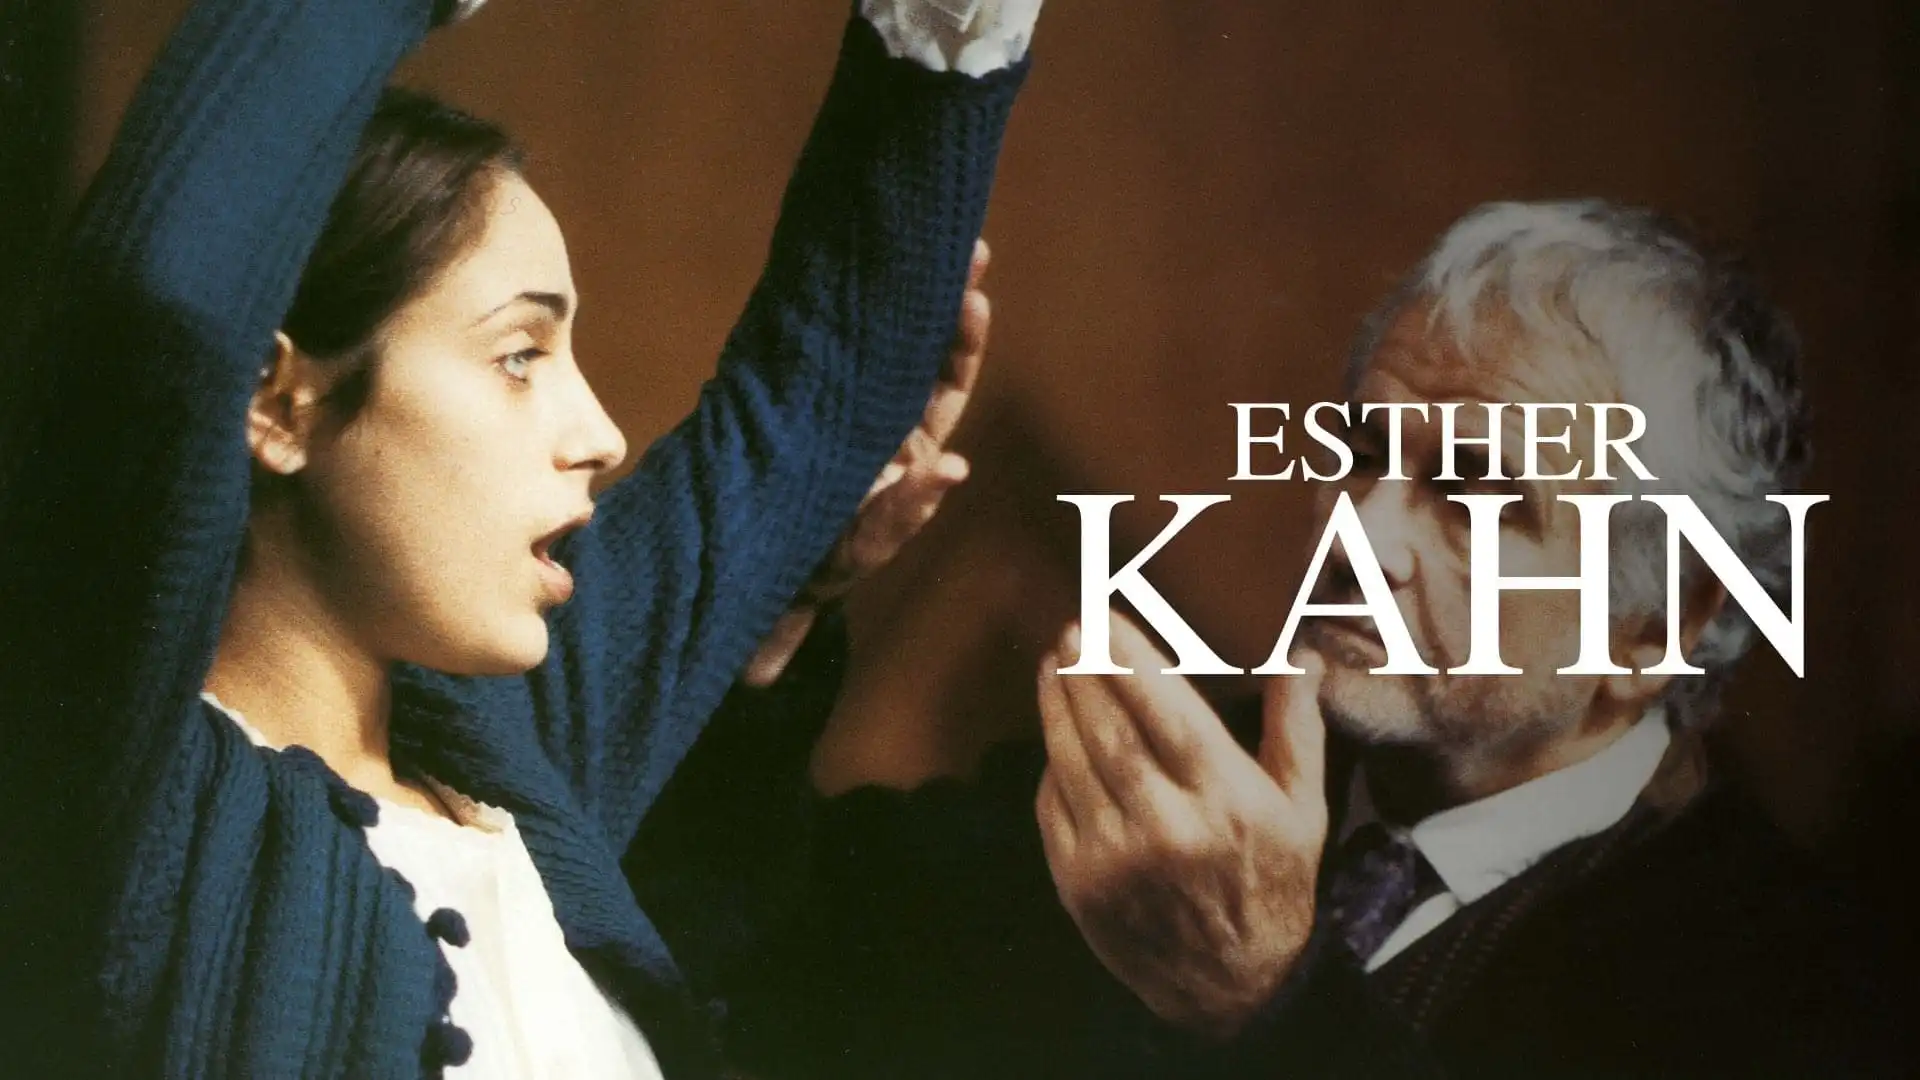 Watch and Download Esther Kahn 3